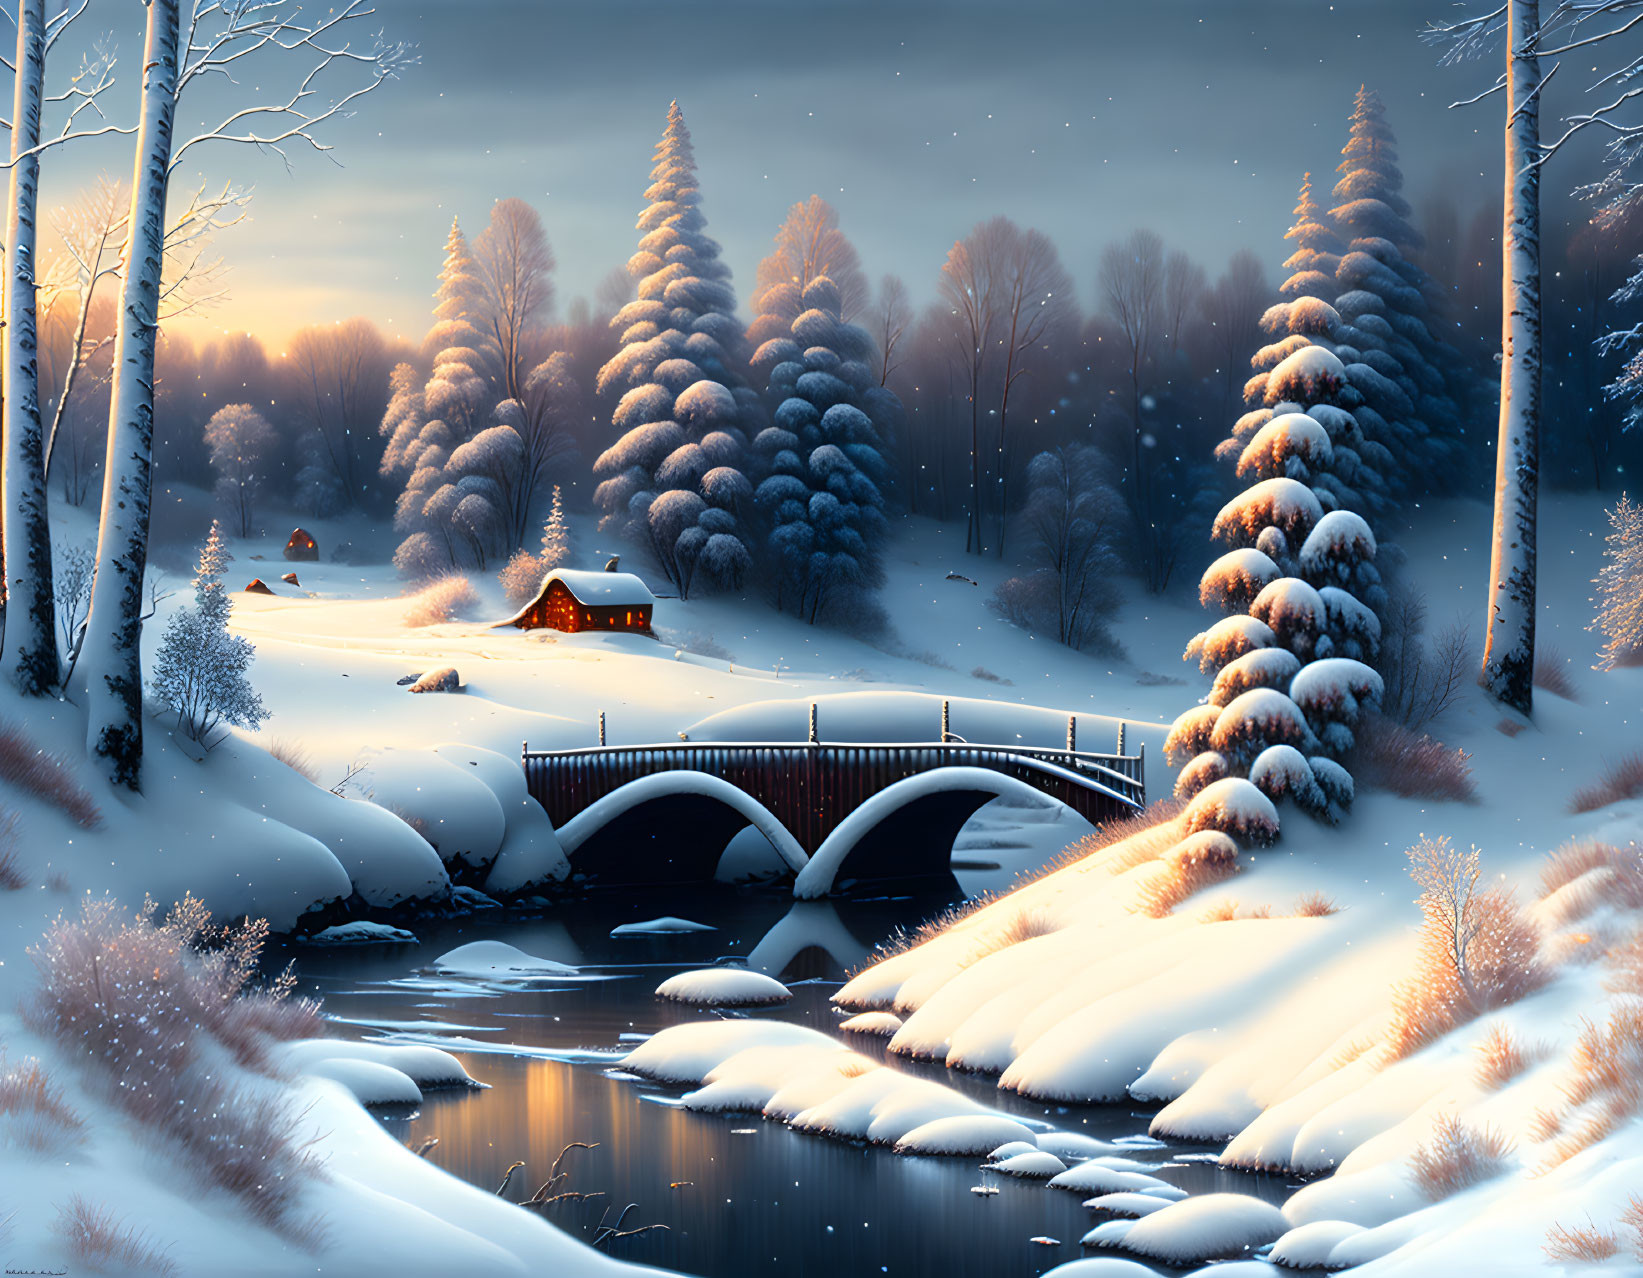 Snow-covered trees, bridge, cottage, and snowfall in serene winter landscape